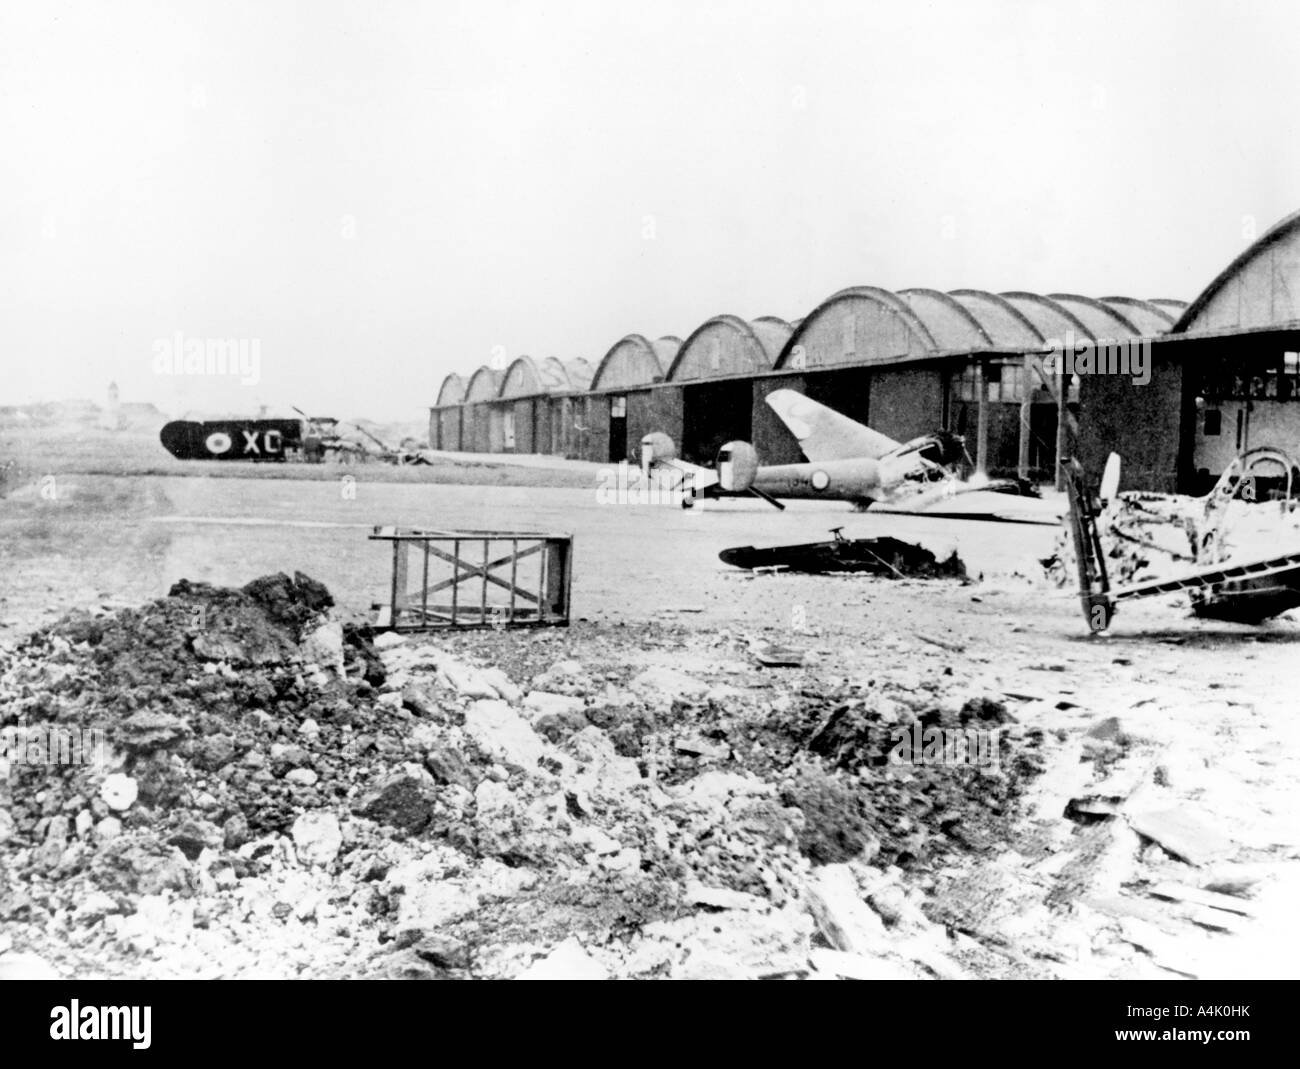 destroyed-aircraft-at-le-bourget-airfield-german-occupied-paris-july-A4K0HK.jpg